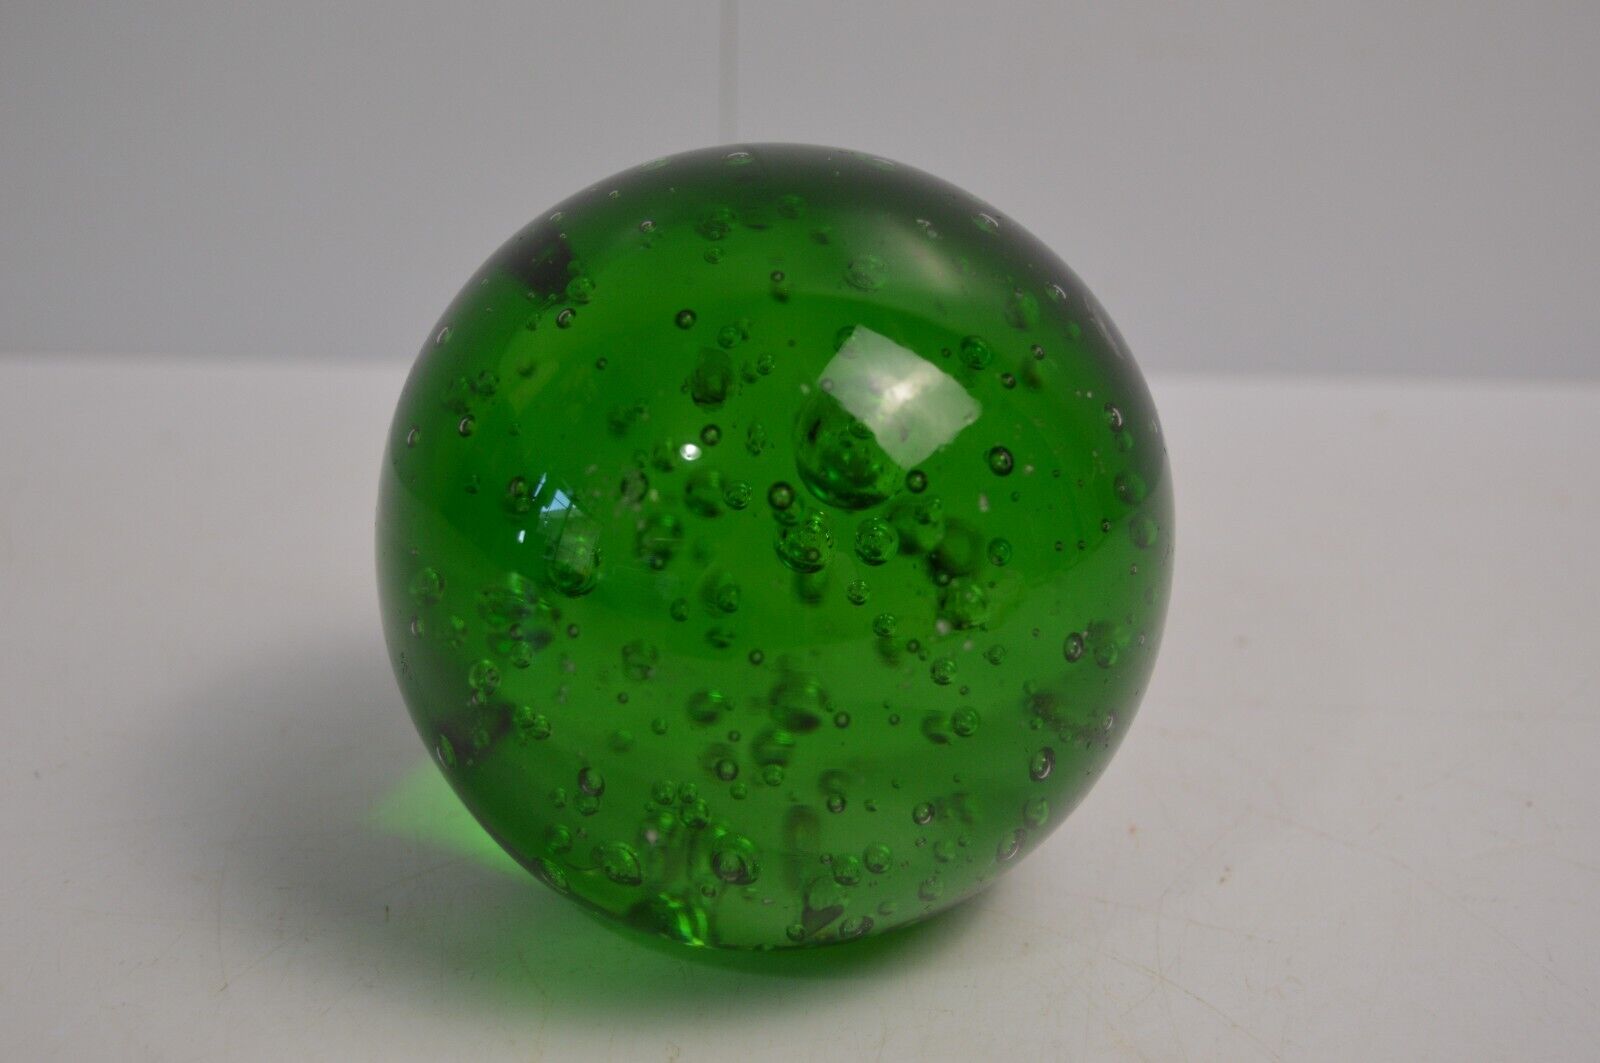 Vintage Green Glass Paperweight MCM Bubbles Collectible Art Decor